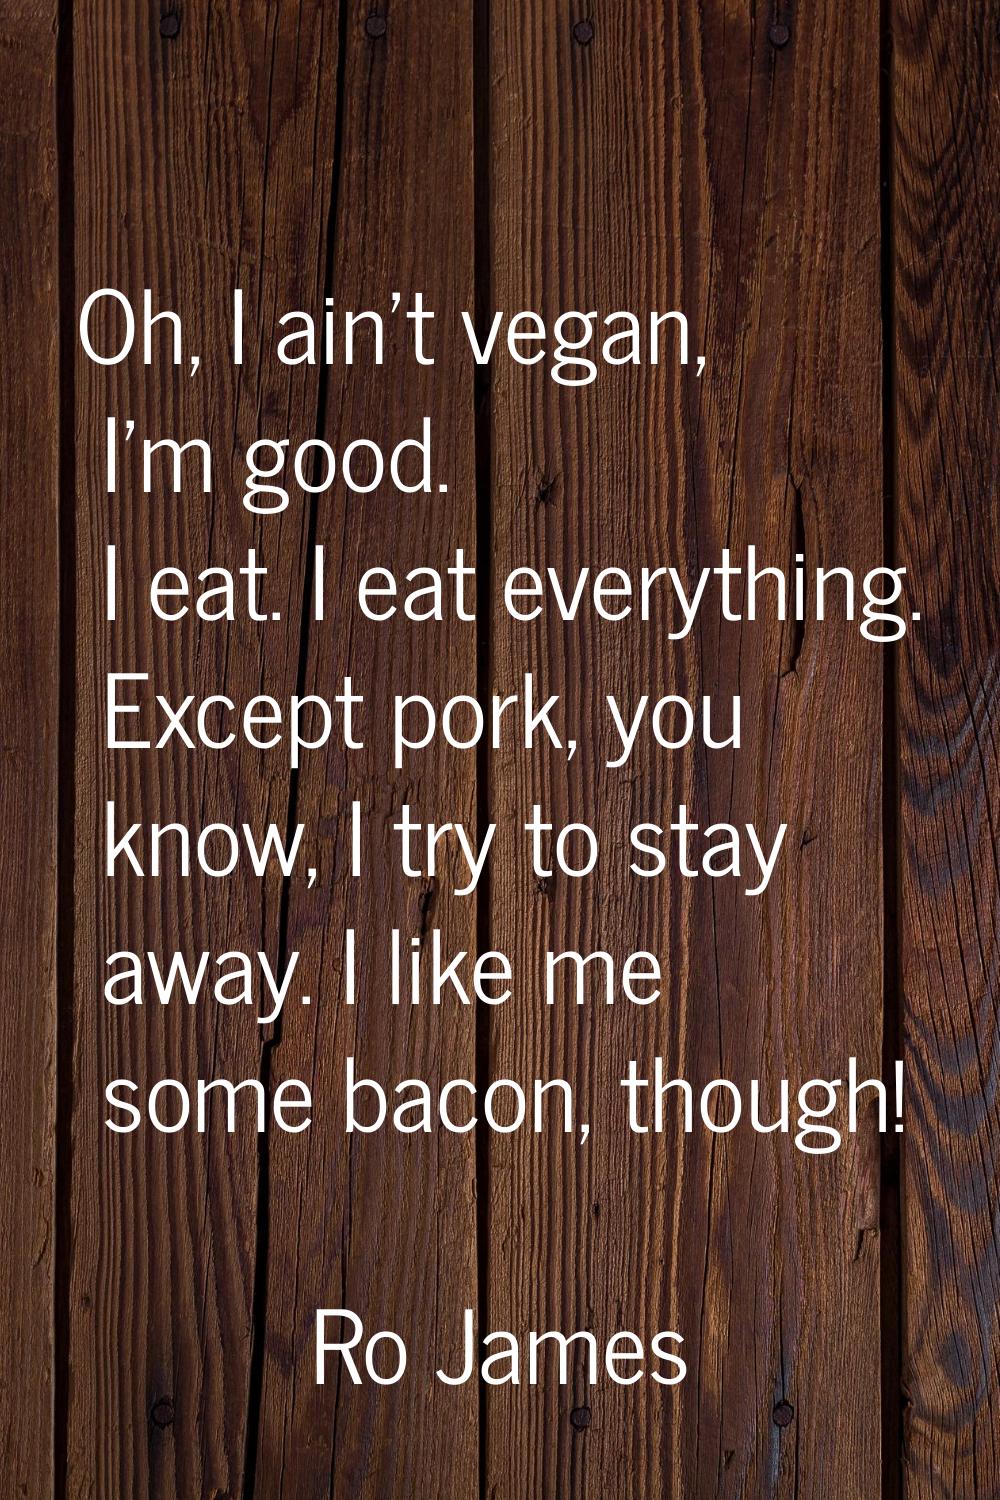 Oh, I ain't vegan, I'm good. I eat. I eat everything. Except pork, you know, I try to stay away. I 